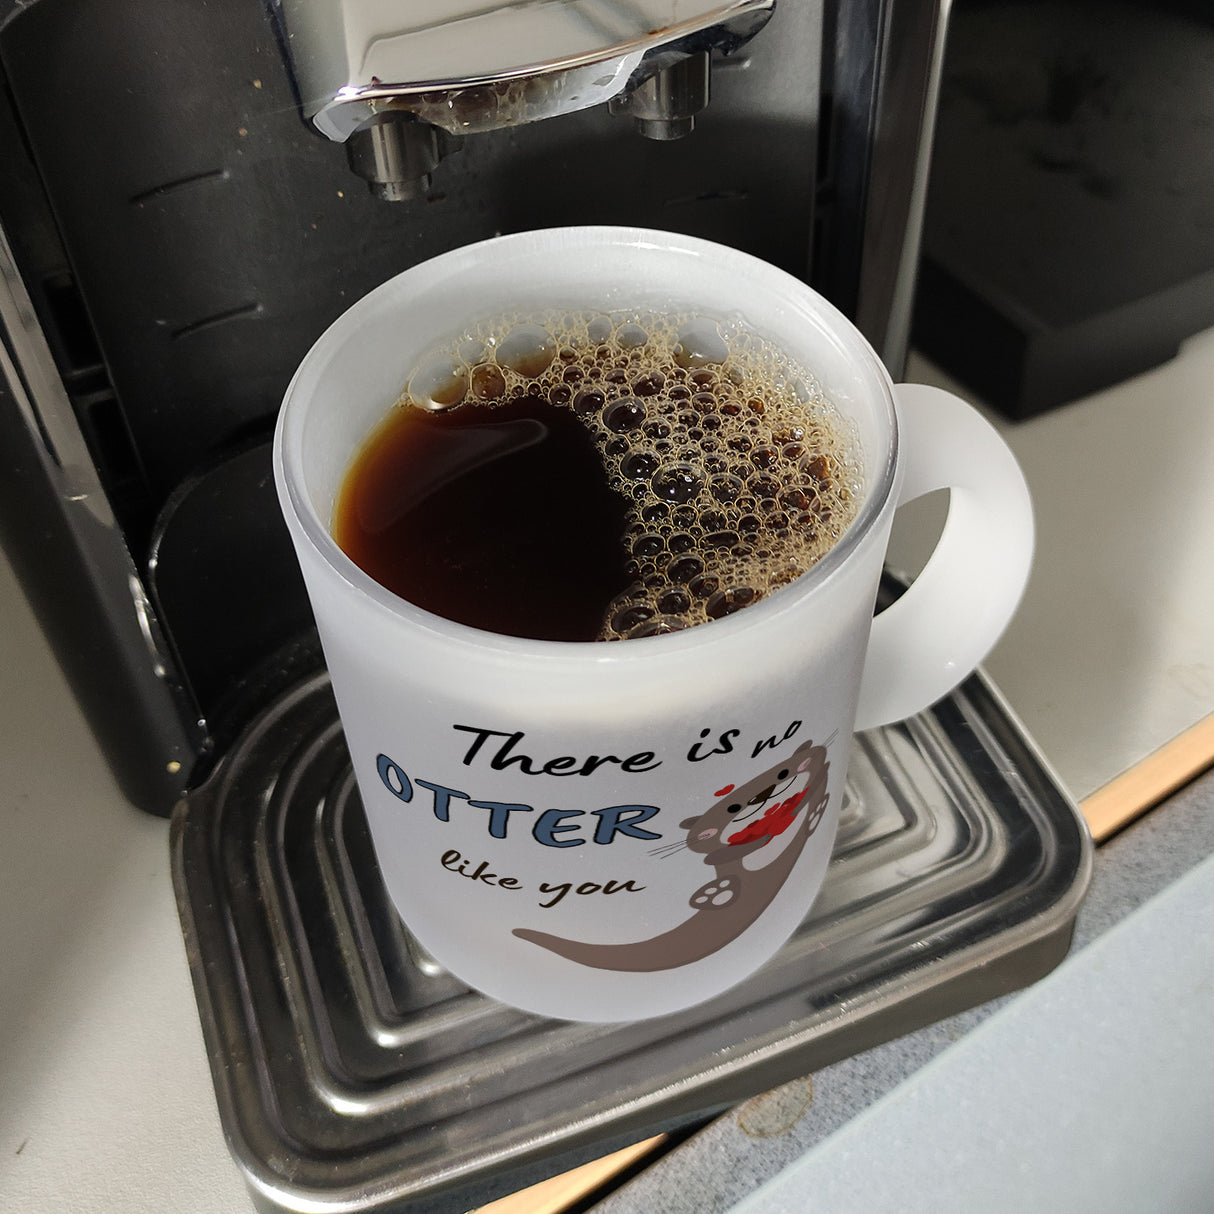 Otter Kaffeebecher mit Spruch: There is no Otter like you